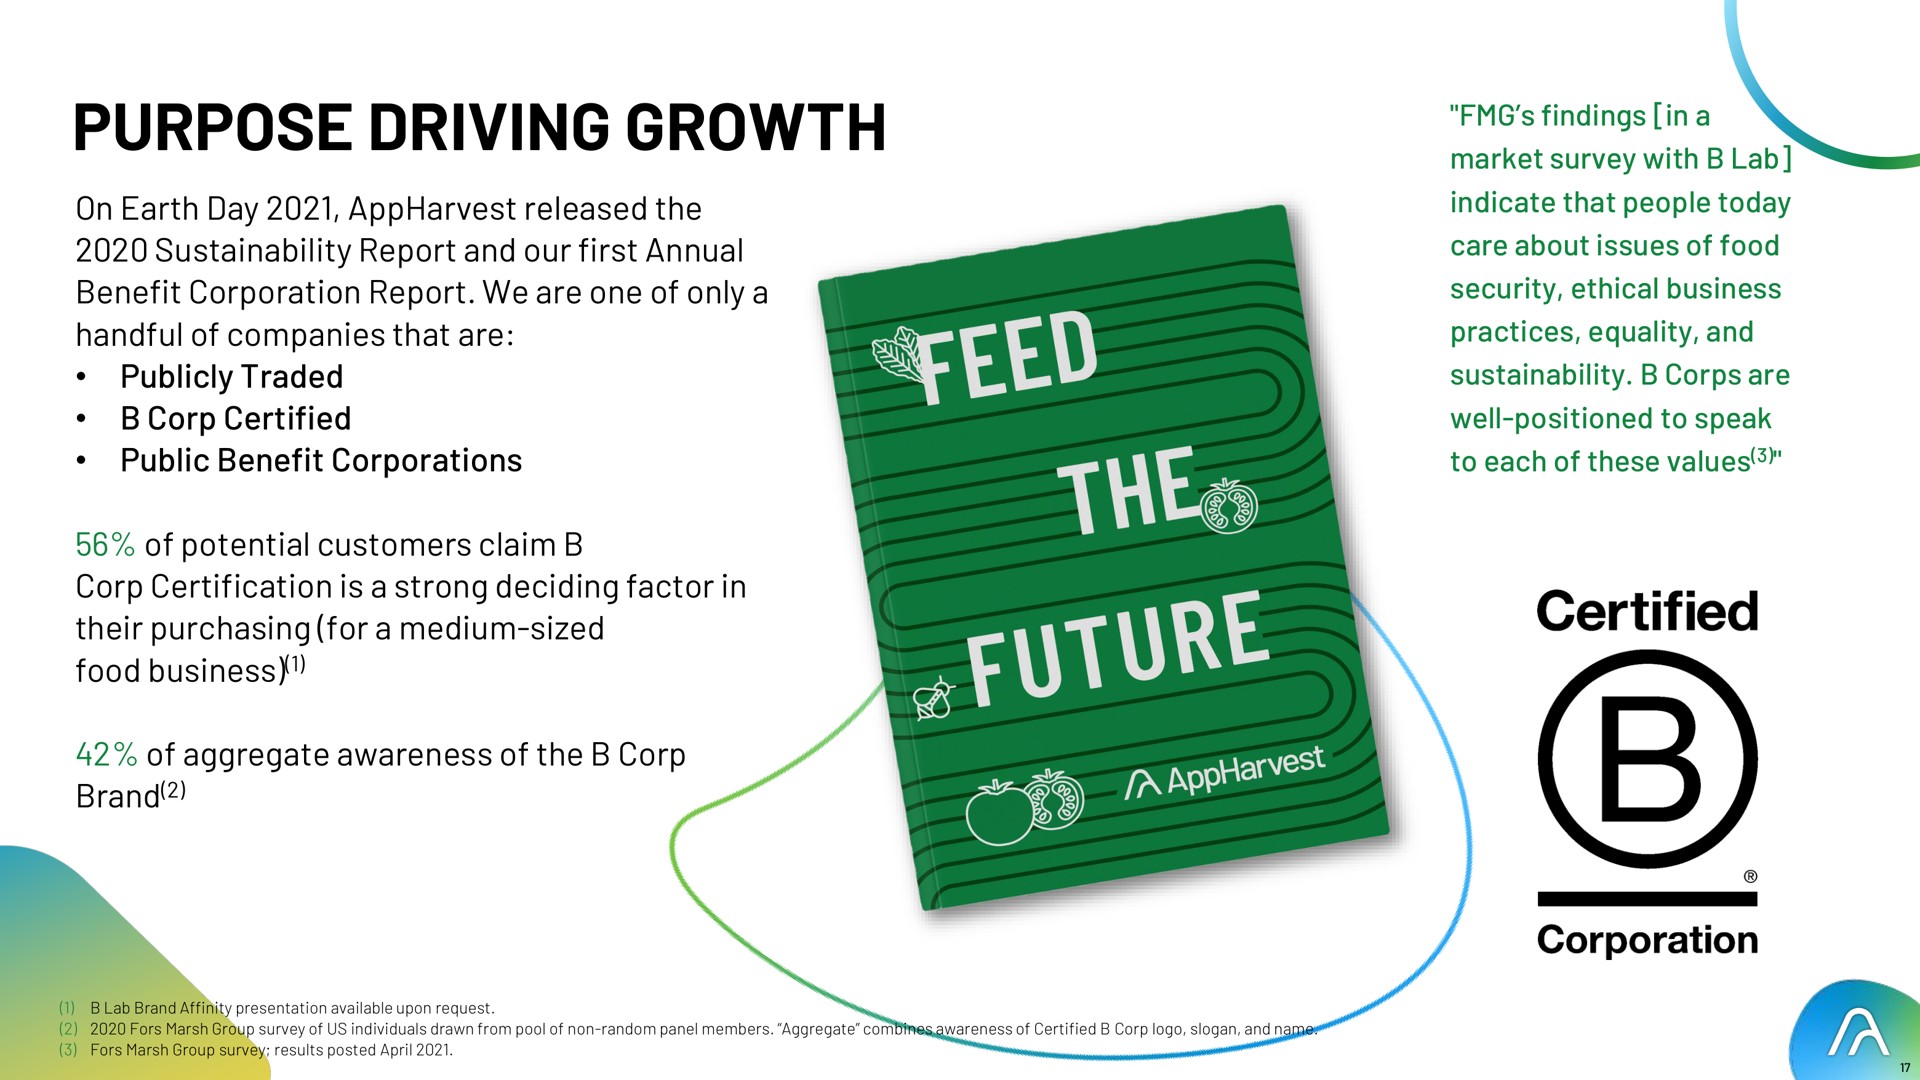 purpose driving growth an fut wis he nee eat certified | AppHarvest